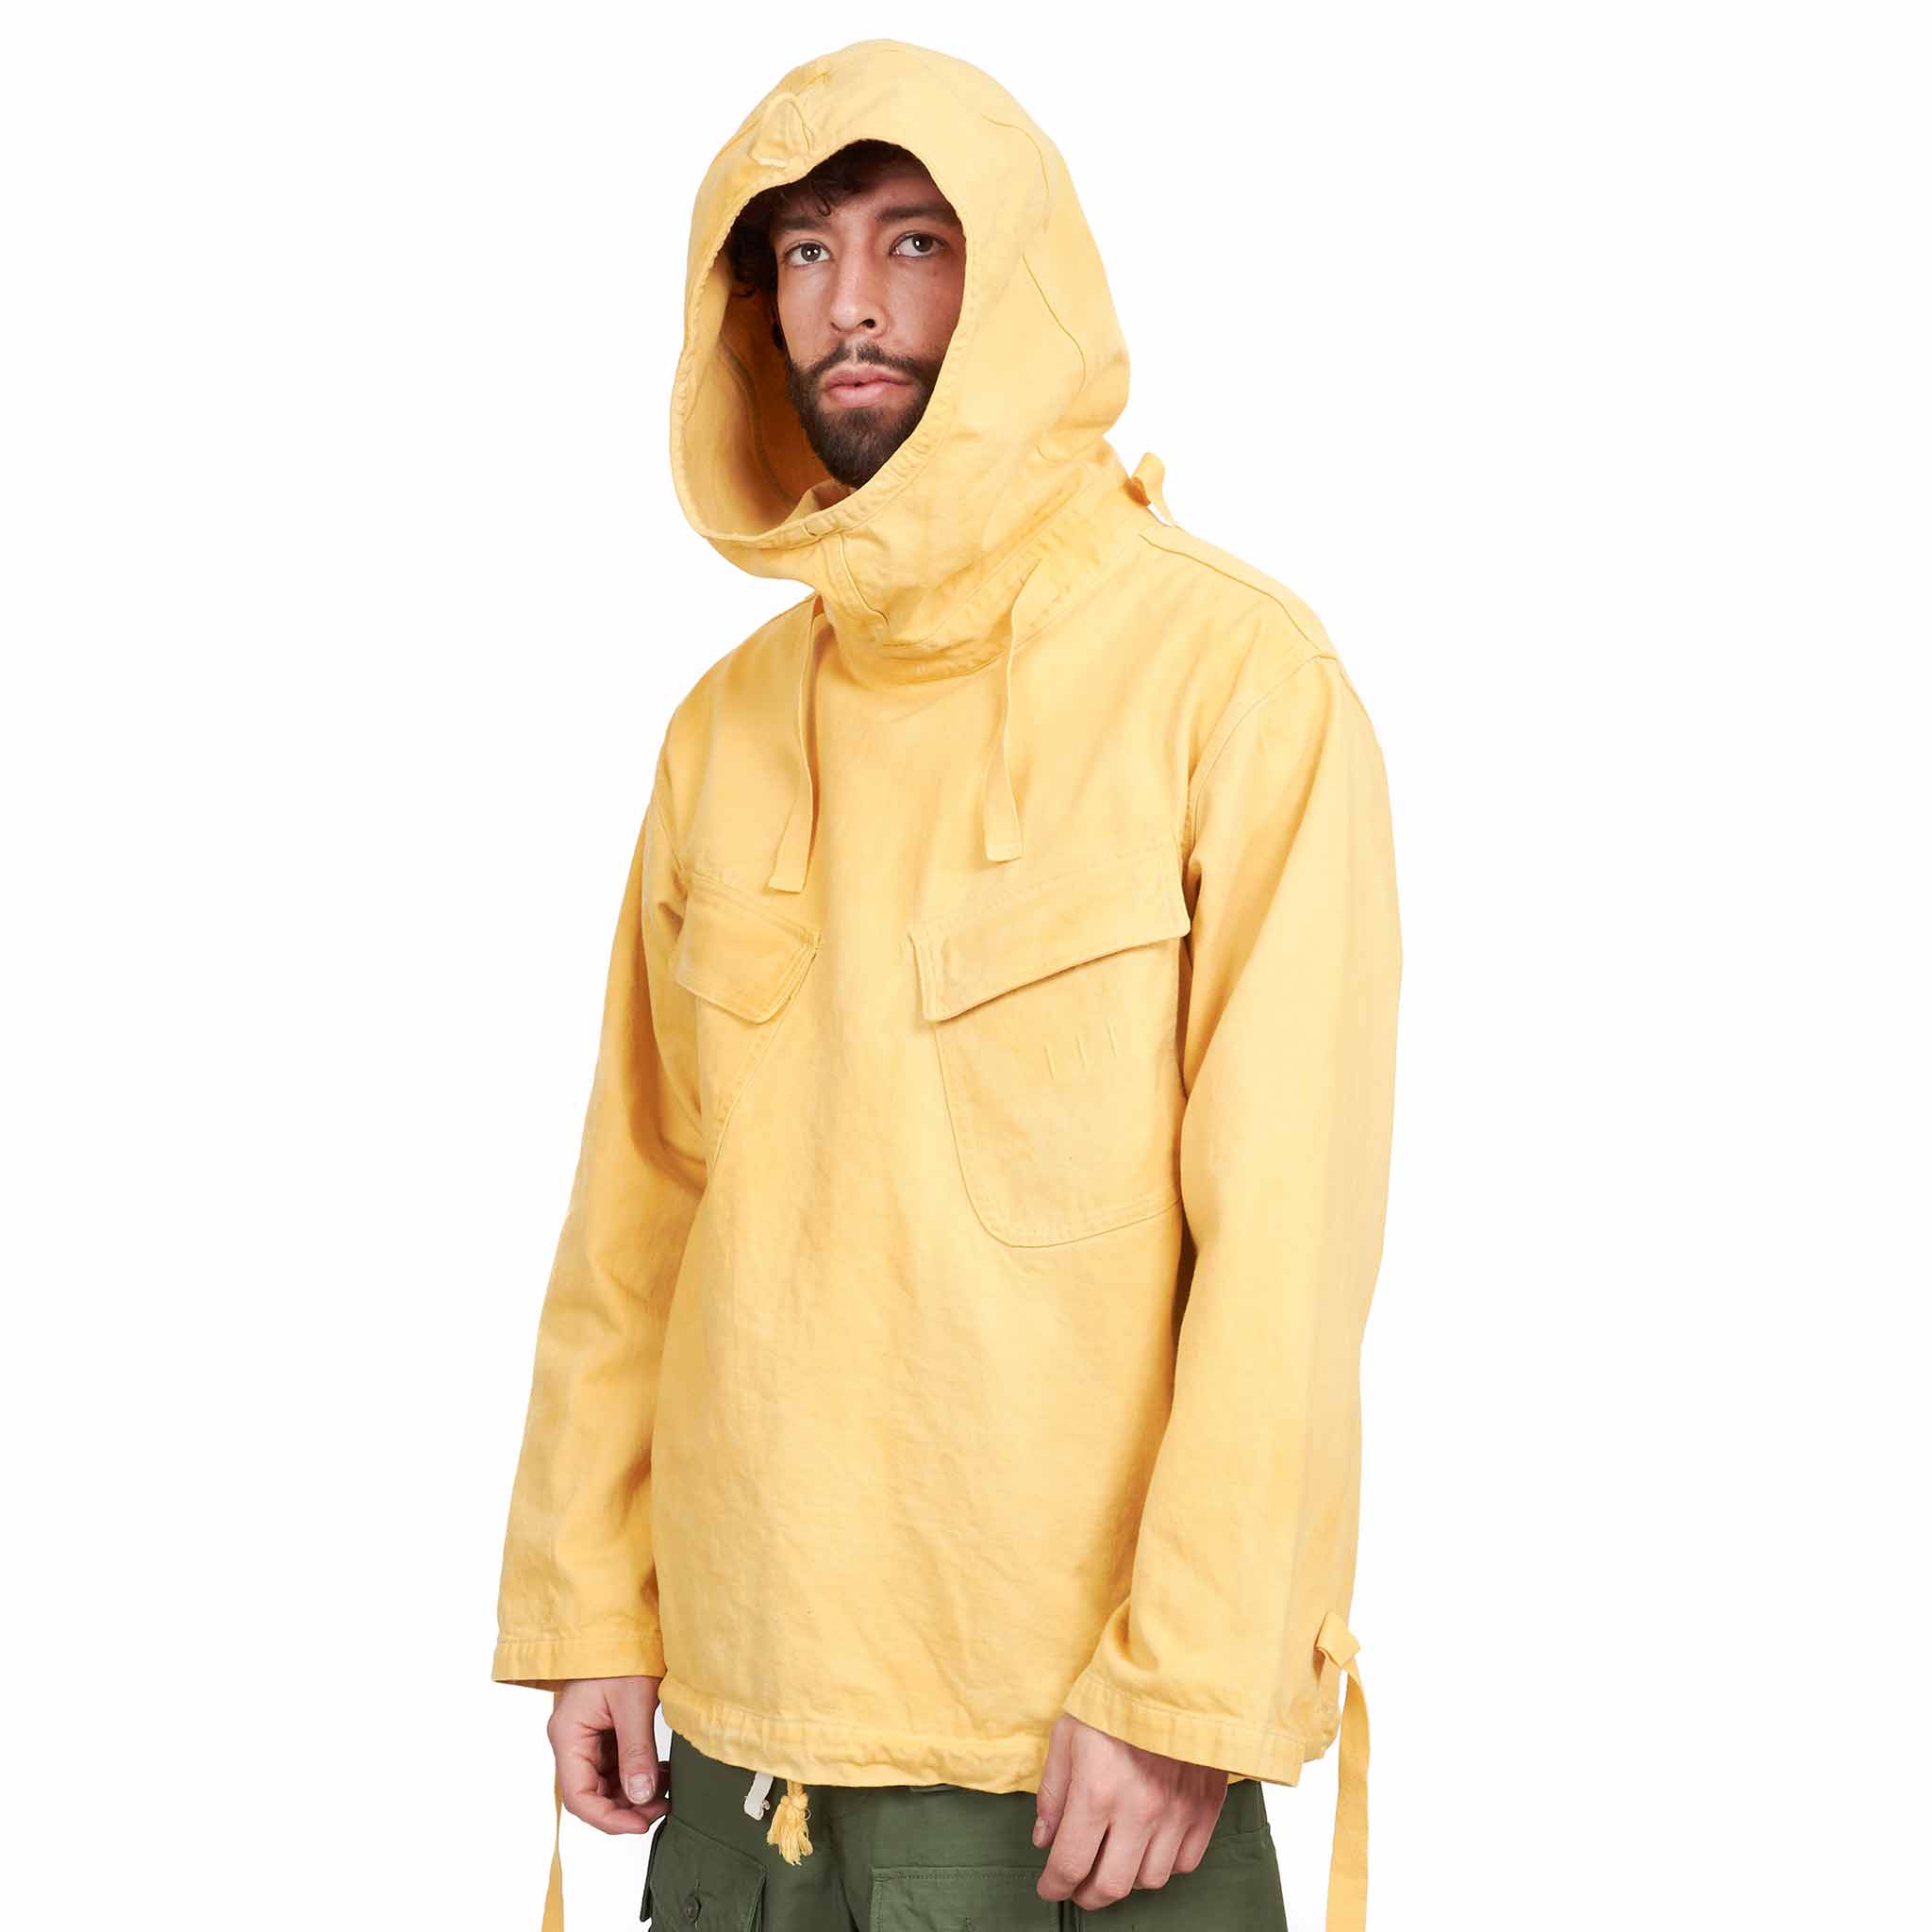 The Real McCoy's MJ21022 USN Salvage Smock Parka (Over-Dyed) Yellow Hood